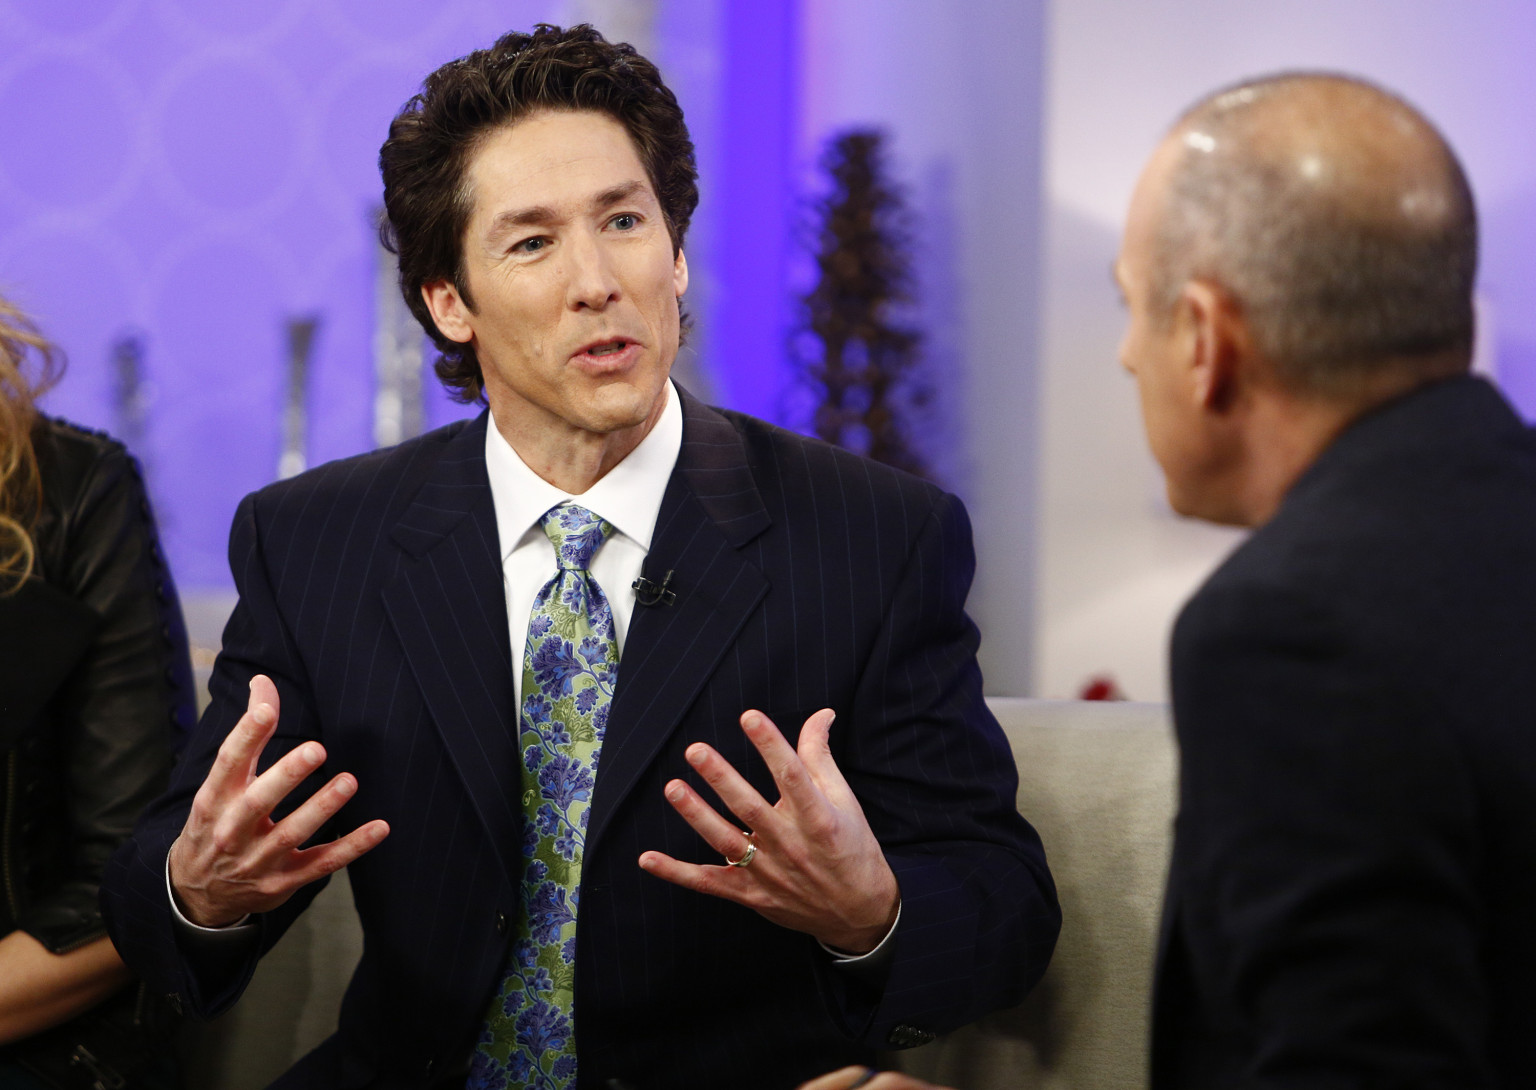 How do you listen to Joel Osteen's weekly message?